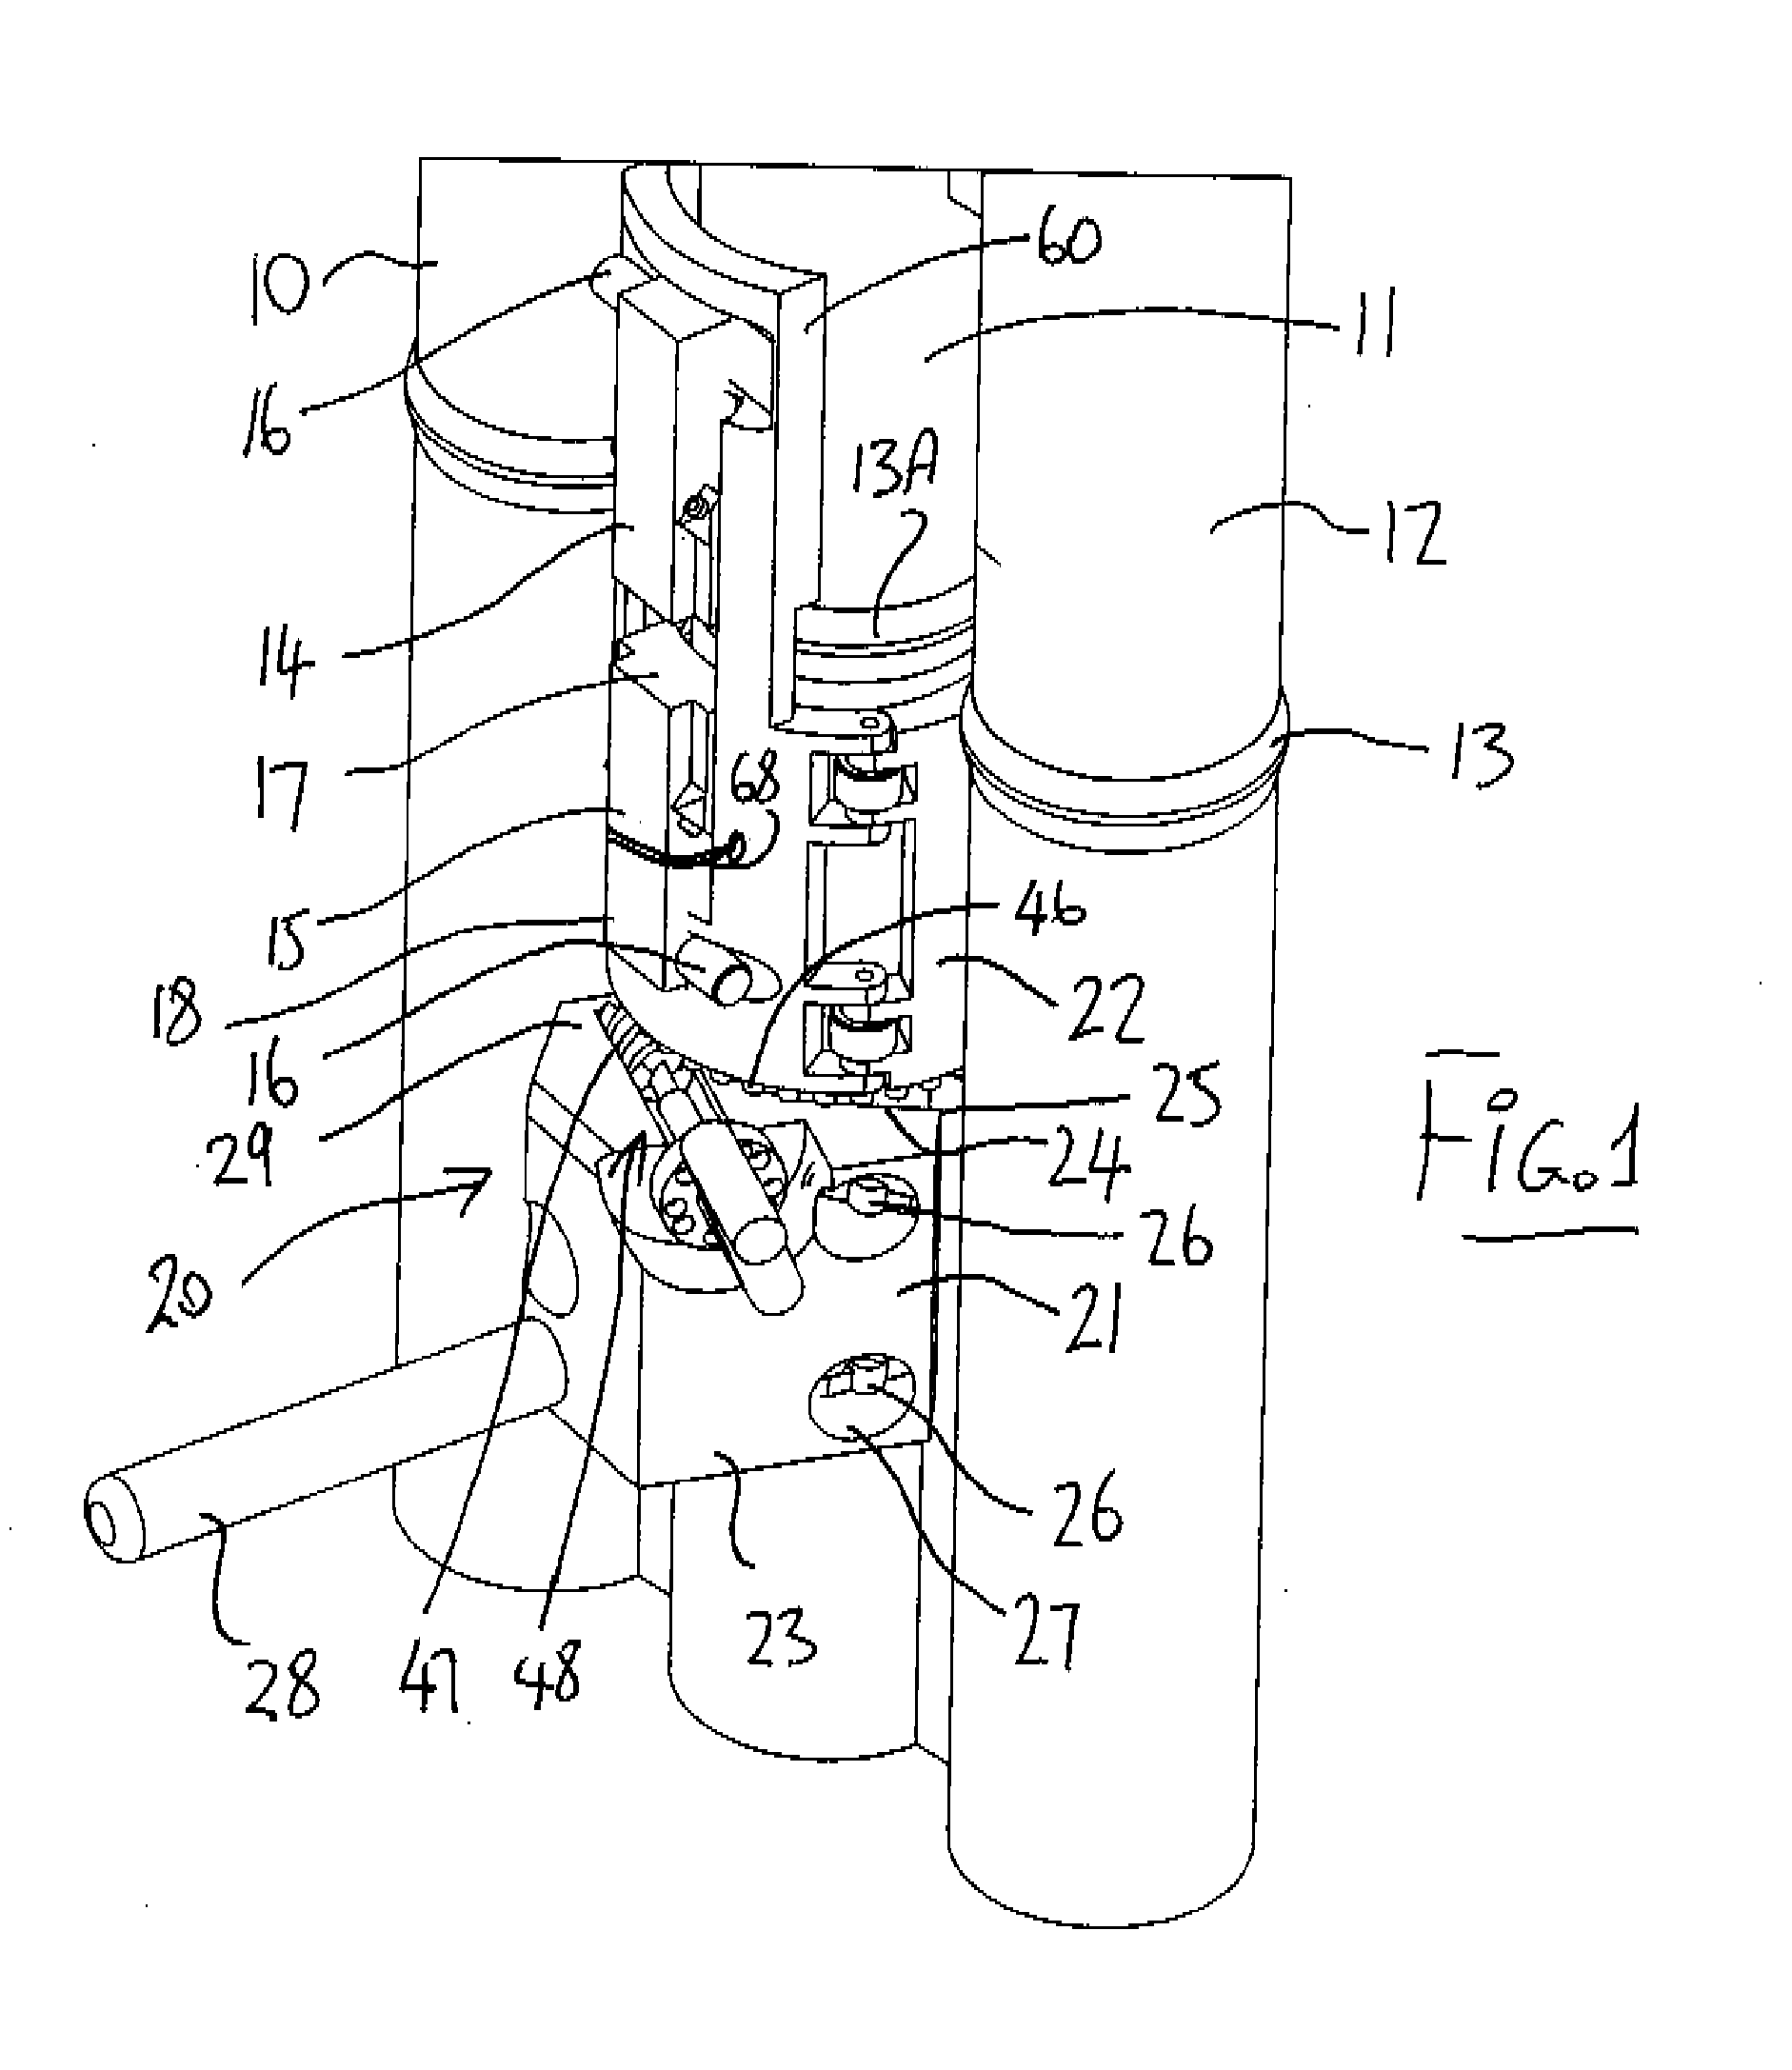 Apparatus for structural testing of a cylindrical body